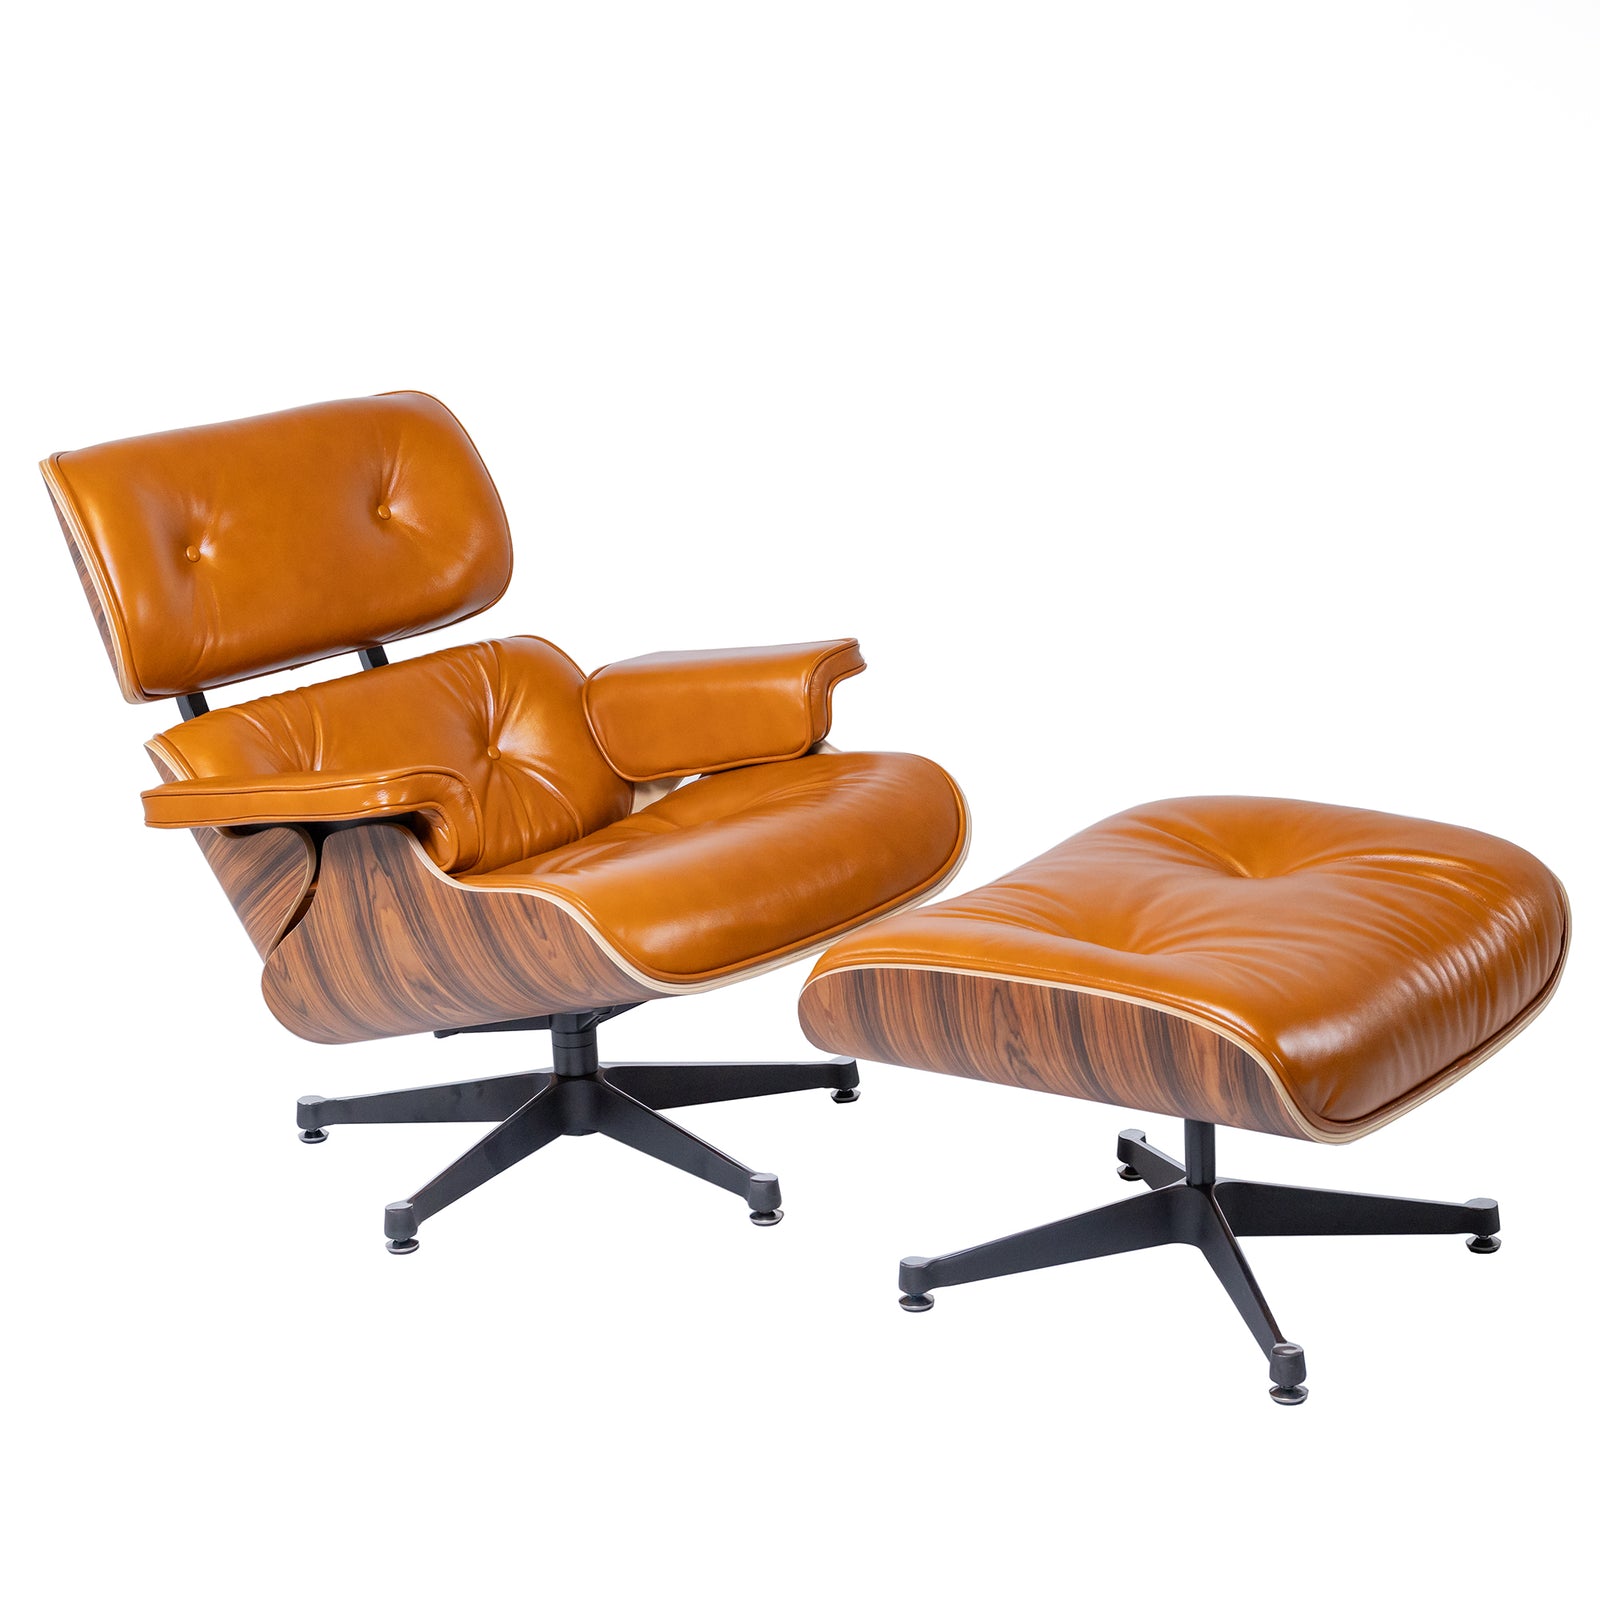 Iconic Lounge Chair and Ottoman - Rosewood & Tan Brown Leather